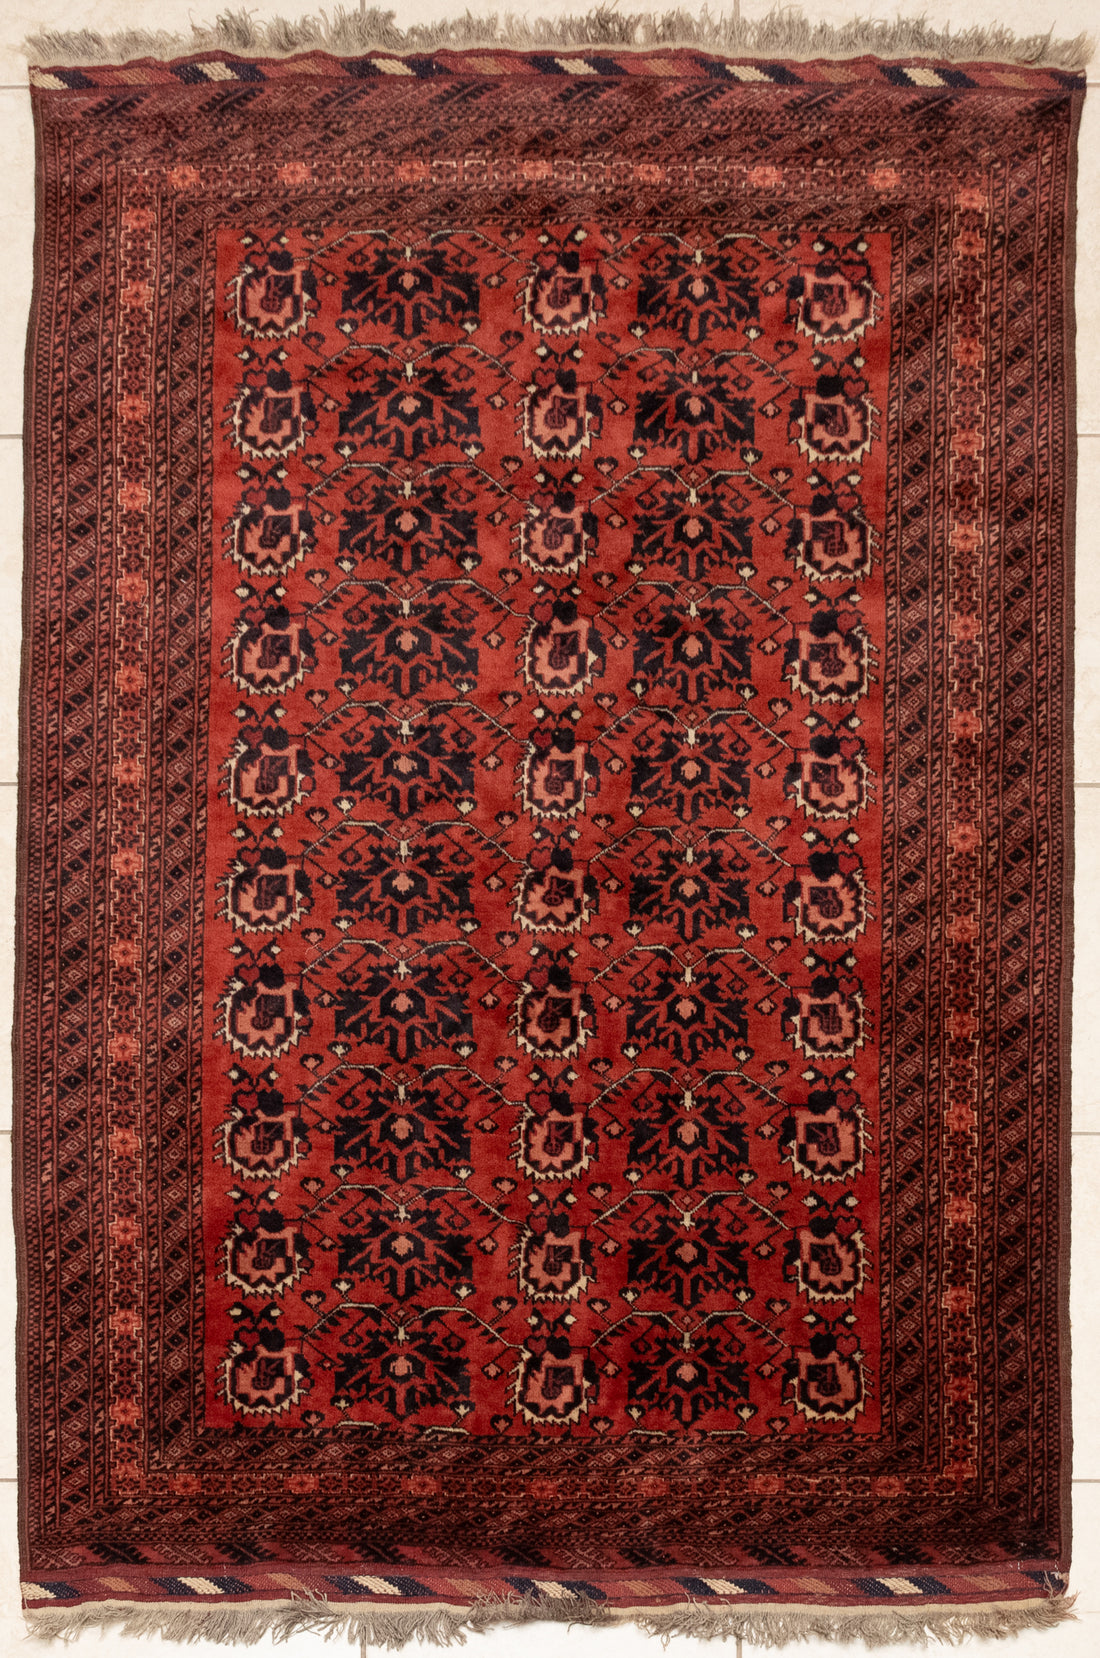 Hand-Knotted Wool Rug 6'10" x 4'2"